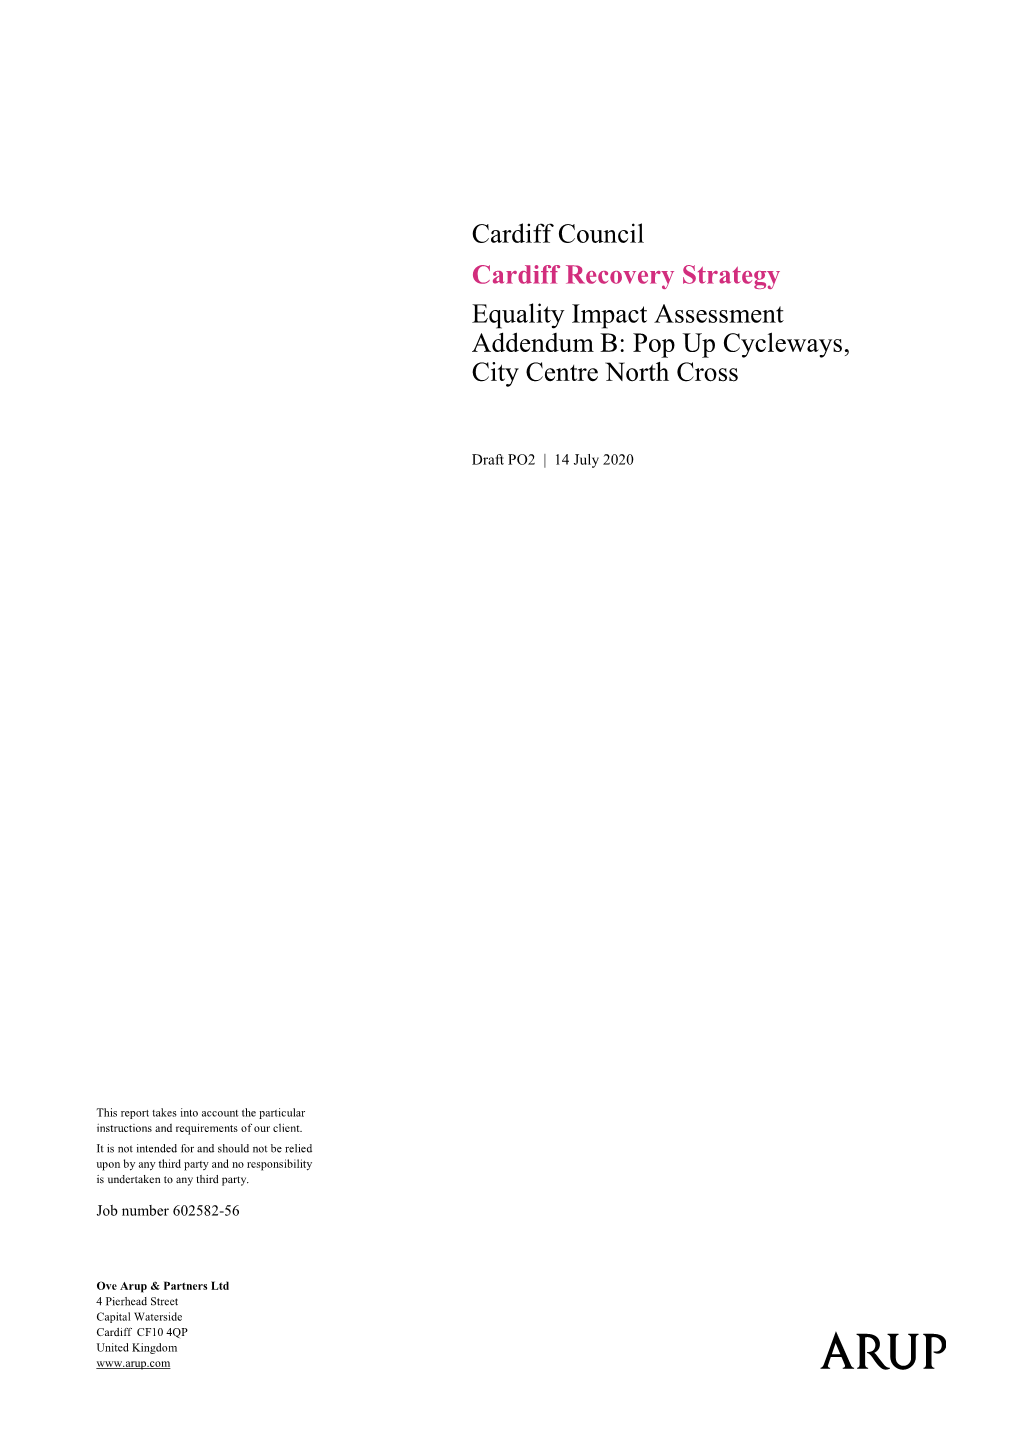 Cardiff Council Cardiff Recovery Strategy Equality Impact Assessment Addendum B: Pop up Cycleways, City Centre North Cross